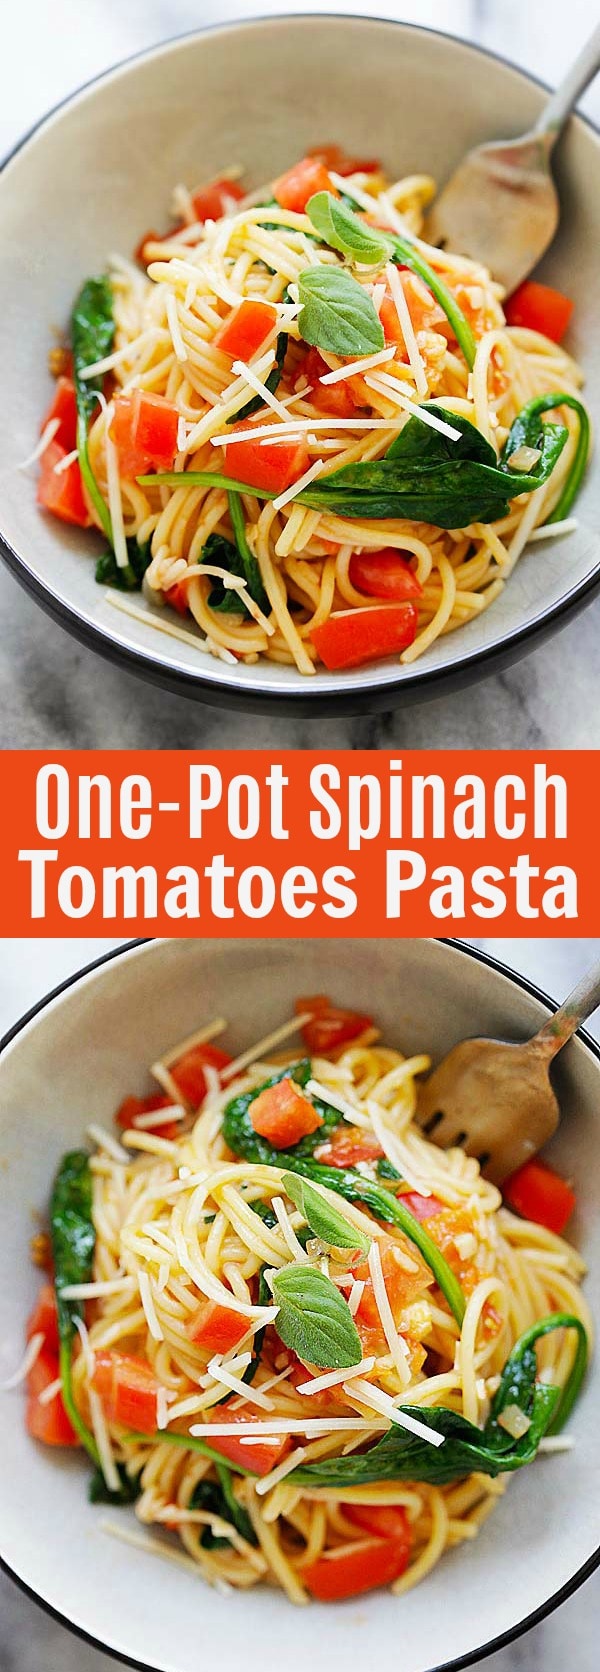 One-pot pasta with spinach and tomatoes